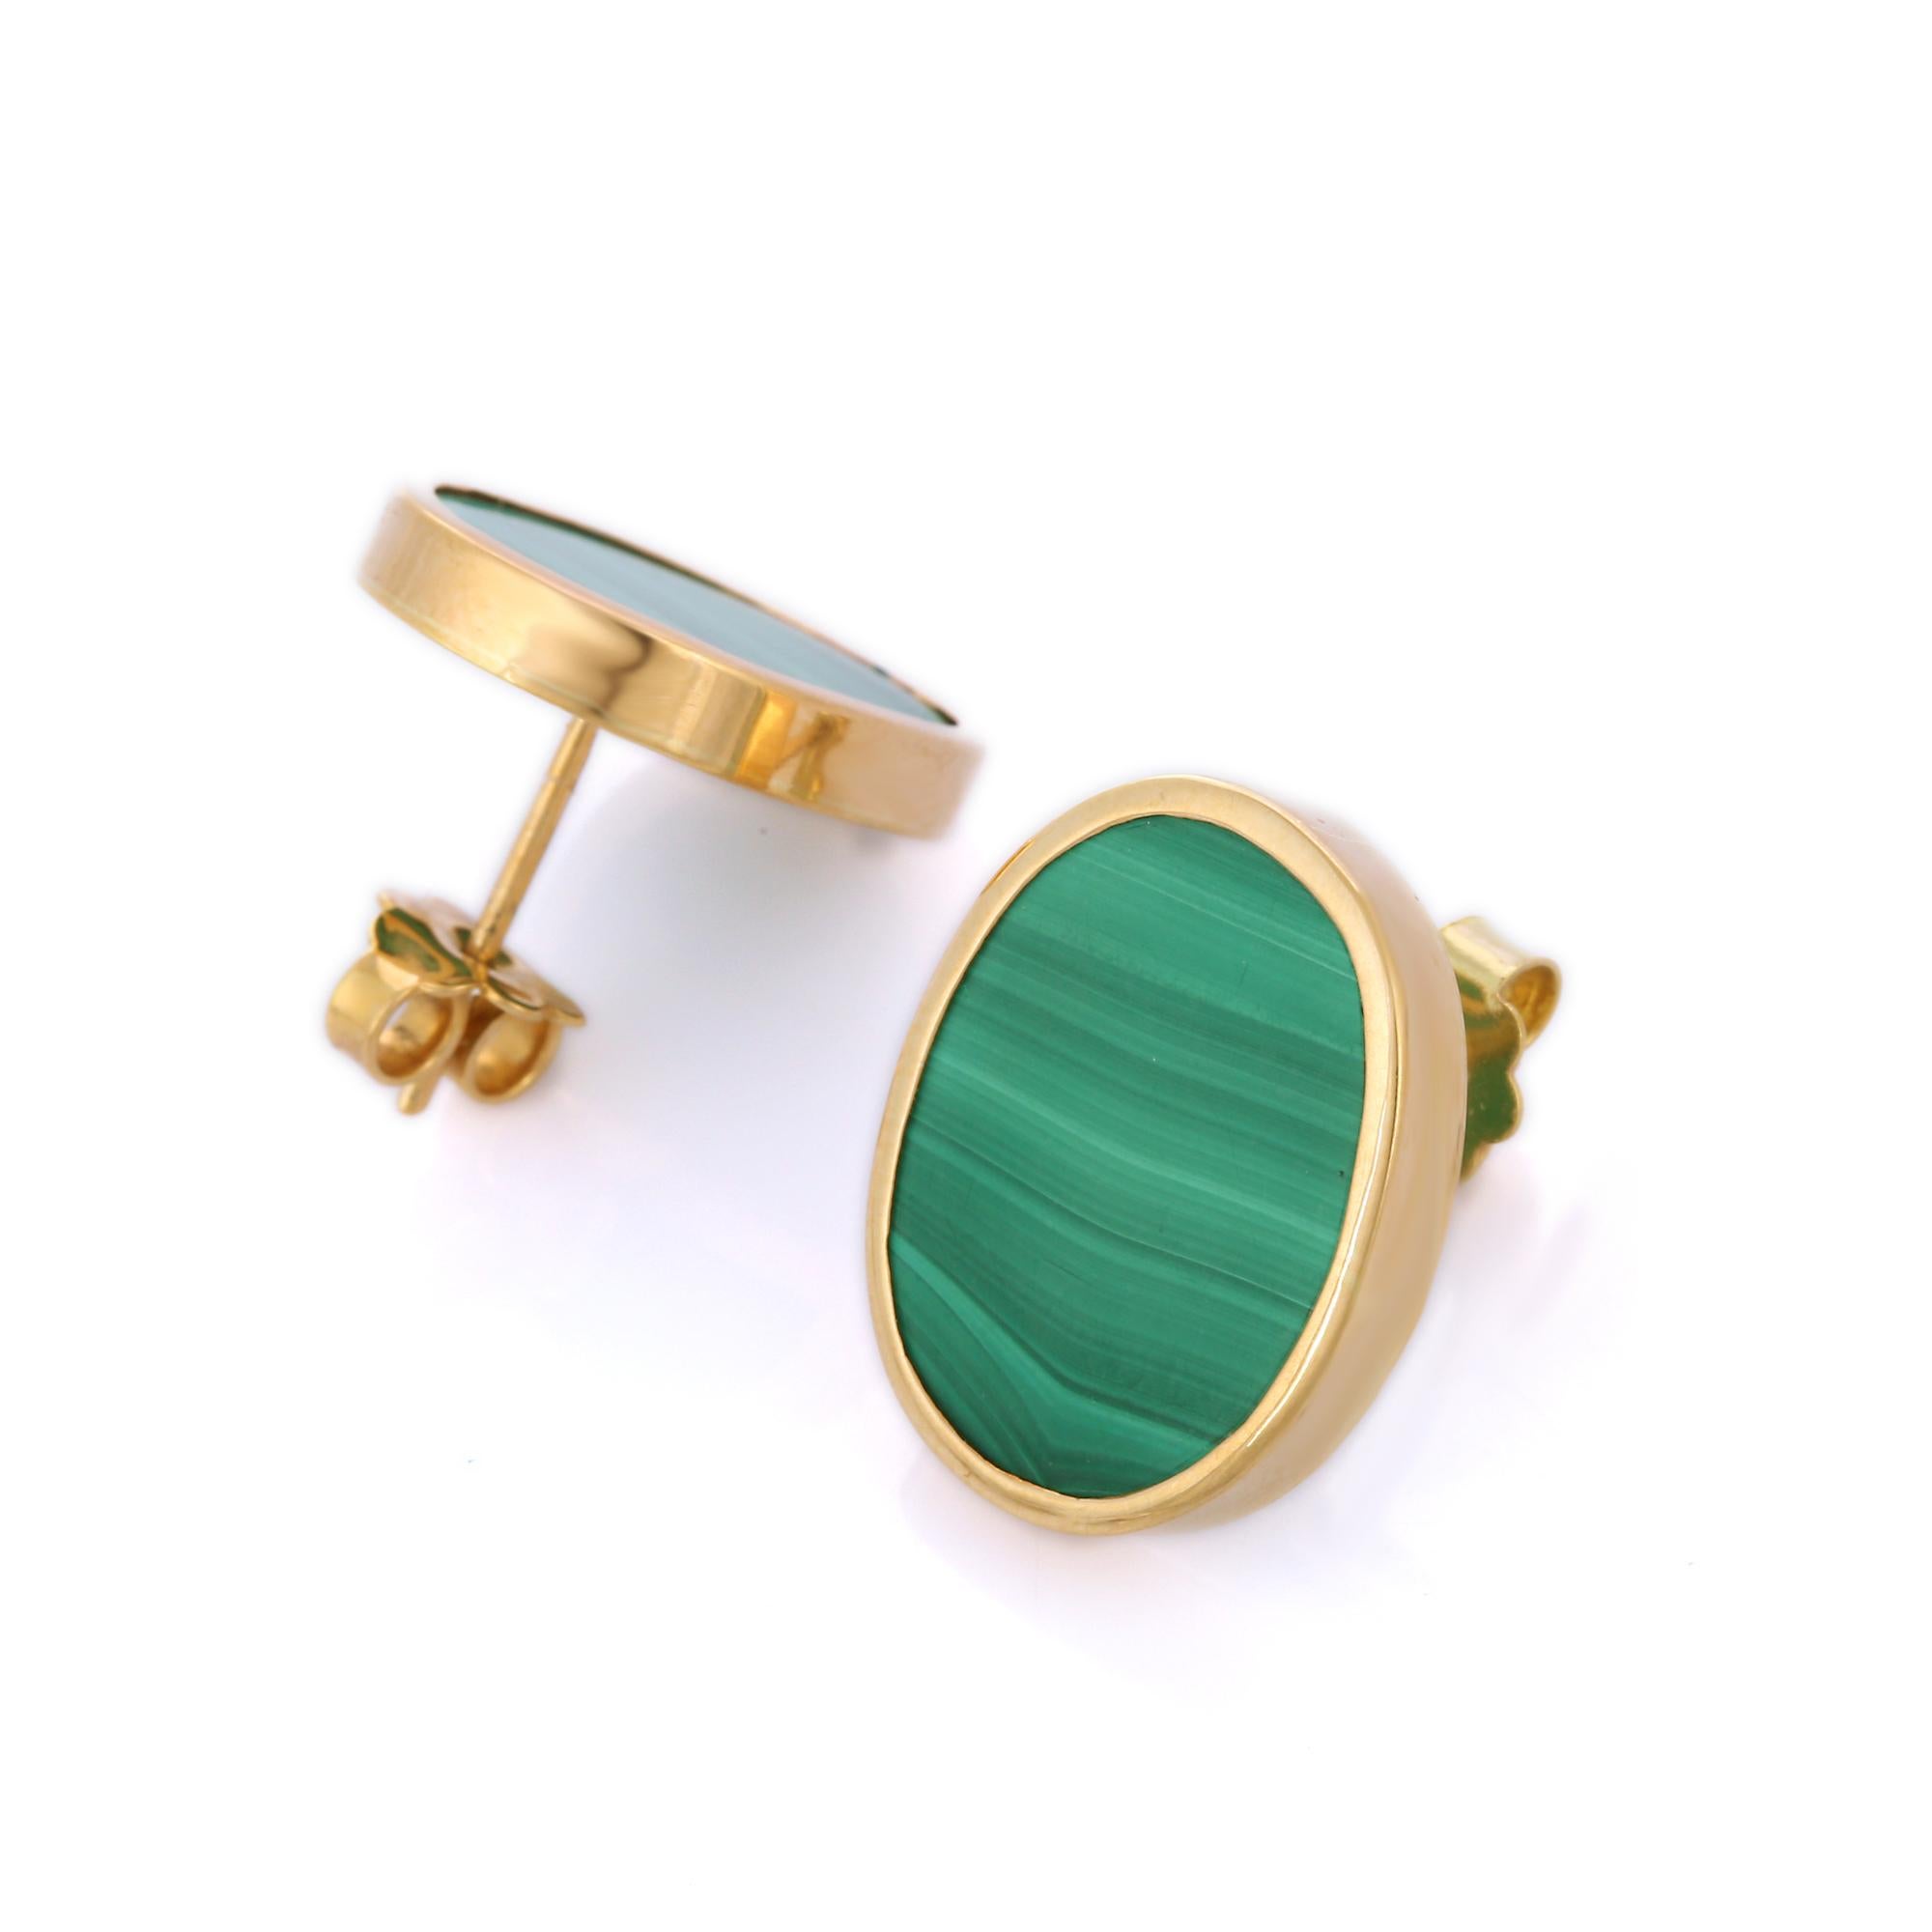 Studs create a subtle beauty while showcasing the colors of the natural precious gemstones.

Oval cut malachite studs in 18K gold. Embrace your look with these stunning pair of earrings suitable for any occasion to complete your outfit.

PRODUCT